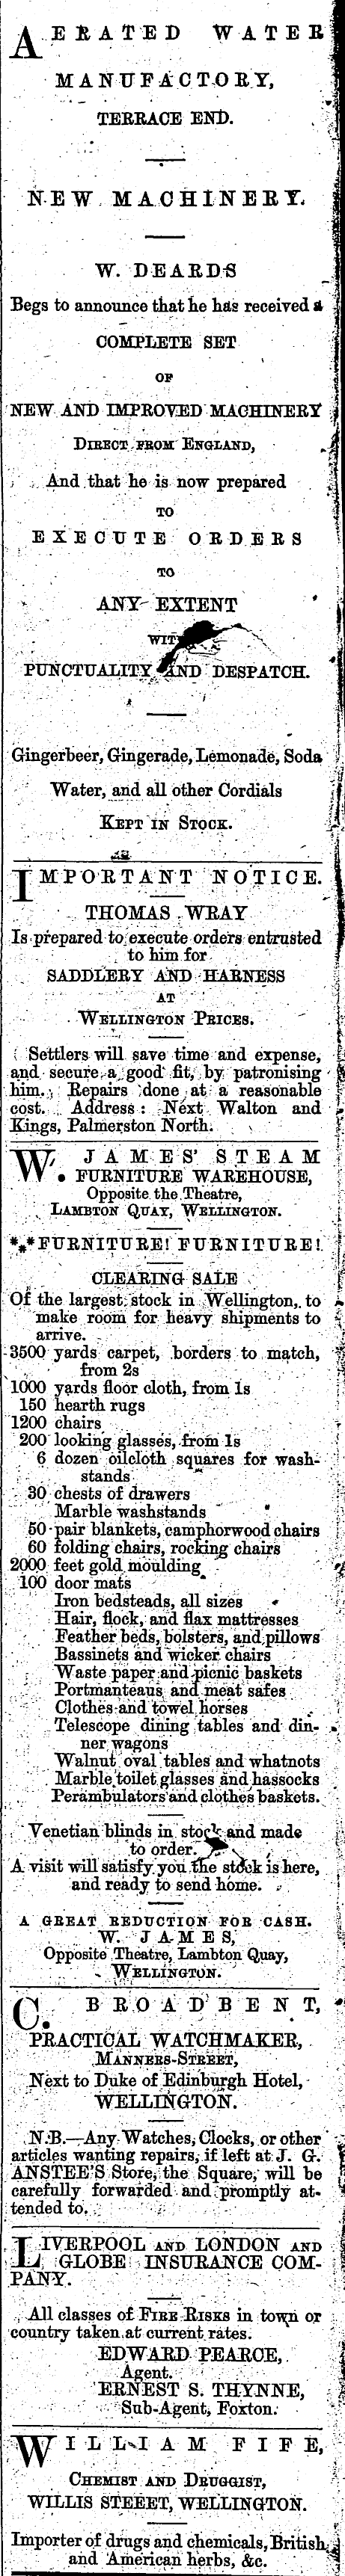 Papers Past Newspapers Manawatu Times June 1877 Page 4 Advertisements Column 5